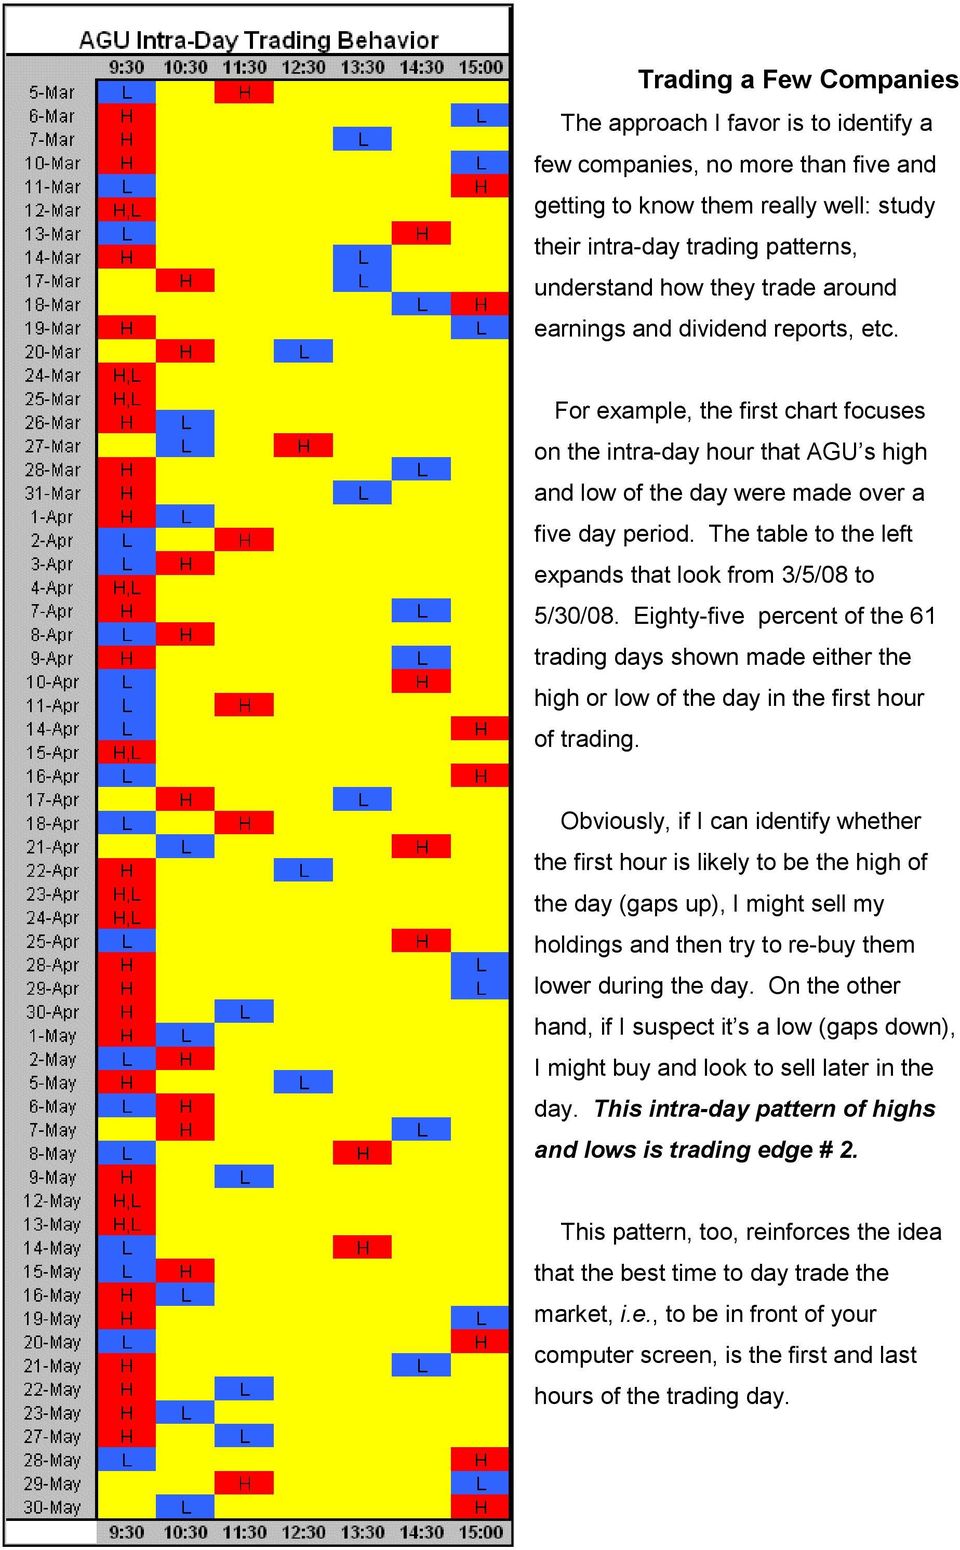 The table to the left expands that look from 3/5/08 to 5/30/08. Eighty-five percent of the 61 trading days shown made either the high or low of the day in the first hour of trading.